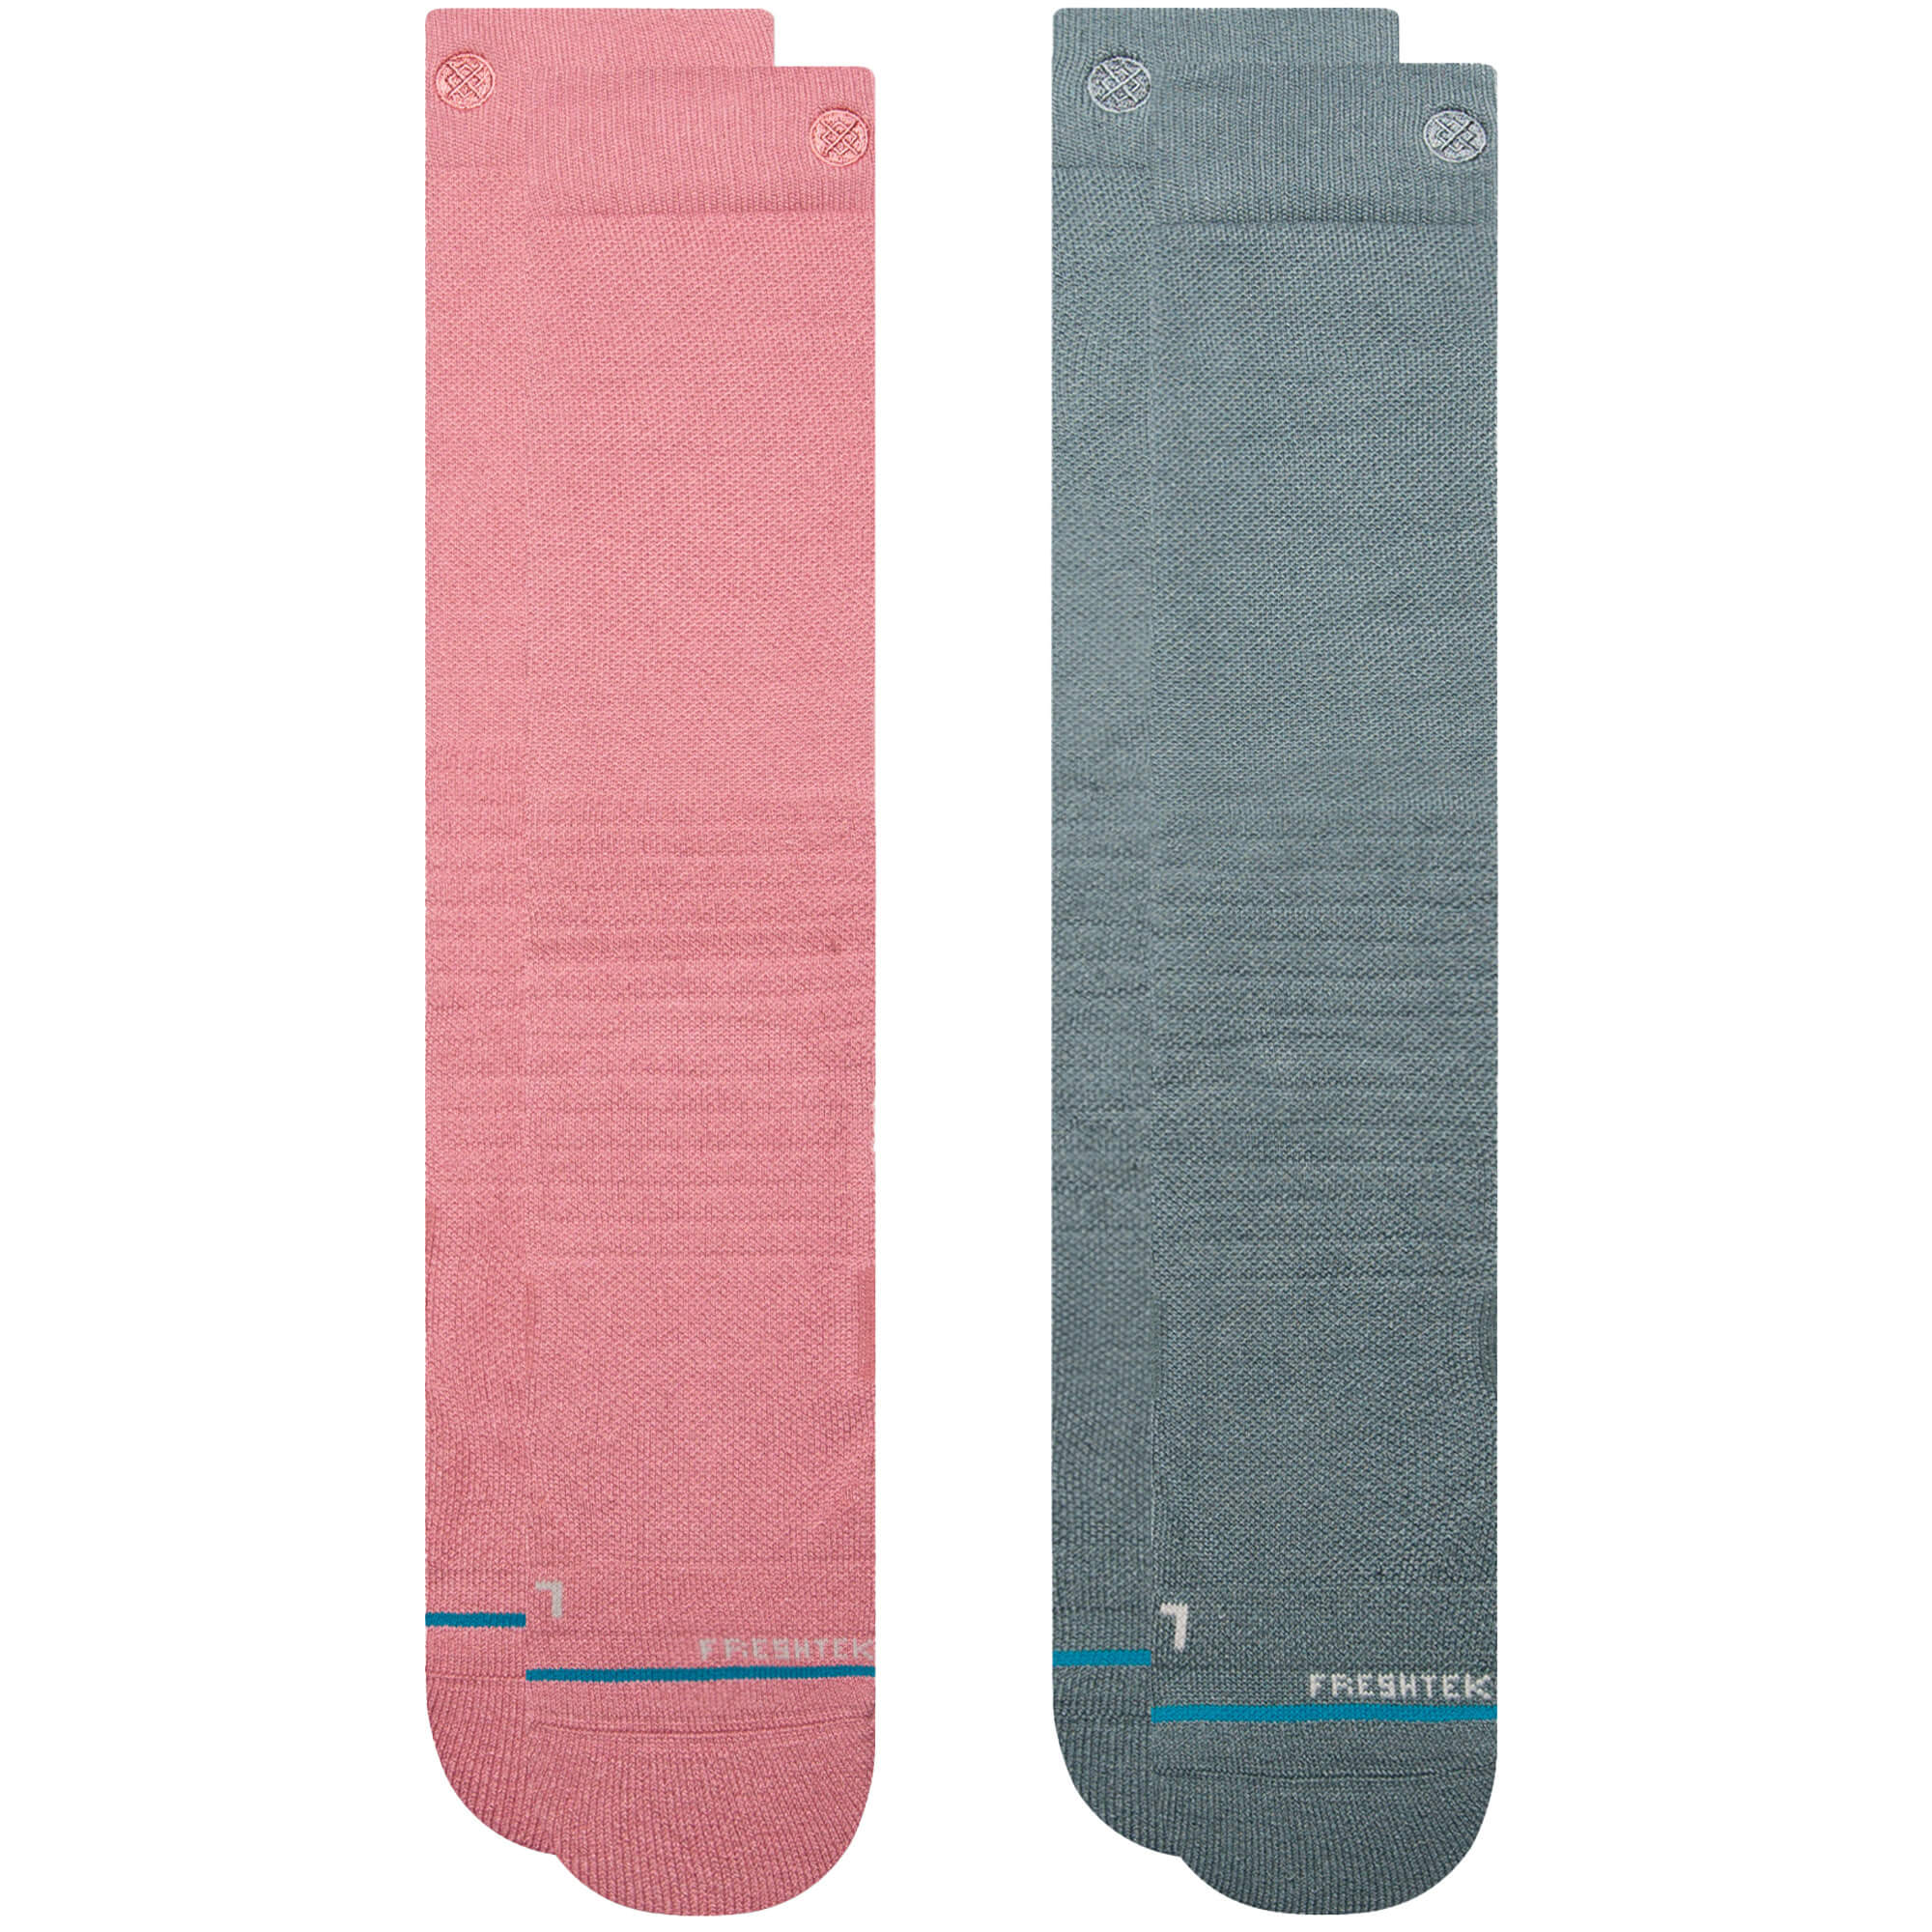 Stance Over The Calf 2 Pack Performance Socks